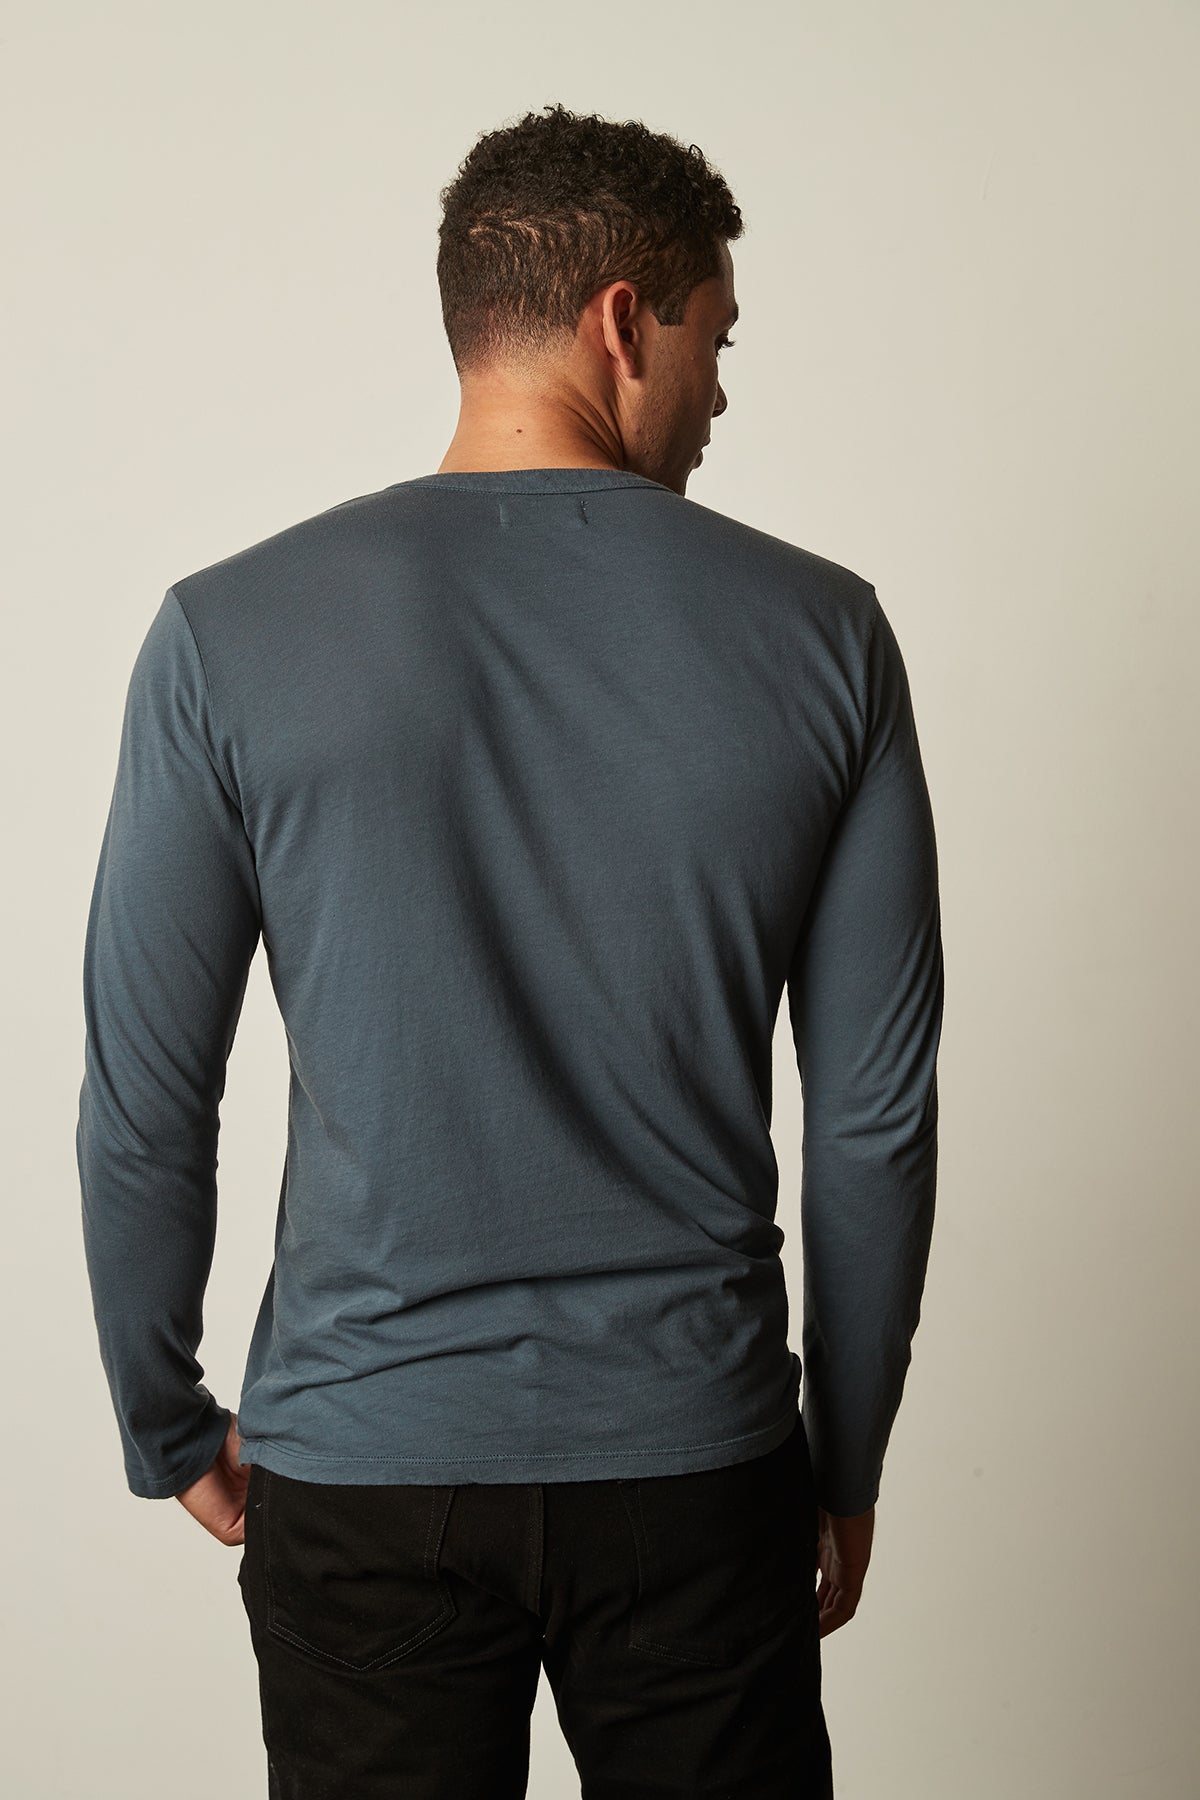   the back view of a man wearing a Velvet by Graham & Spencer ALVARO COTTON JERSEY HENLEY blue long sleeve t-shirt. 